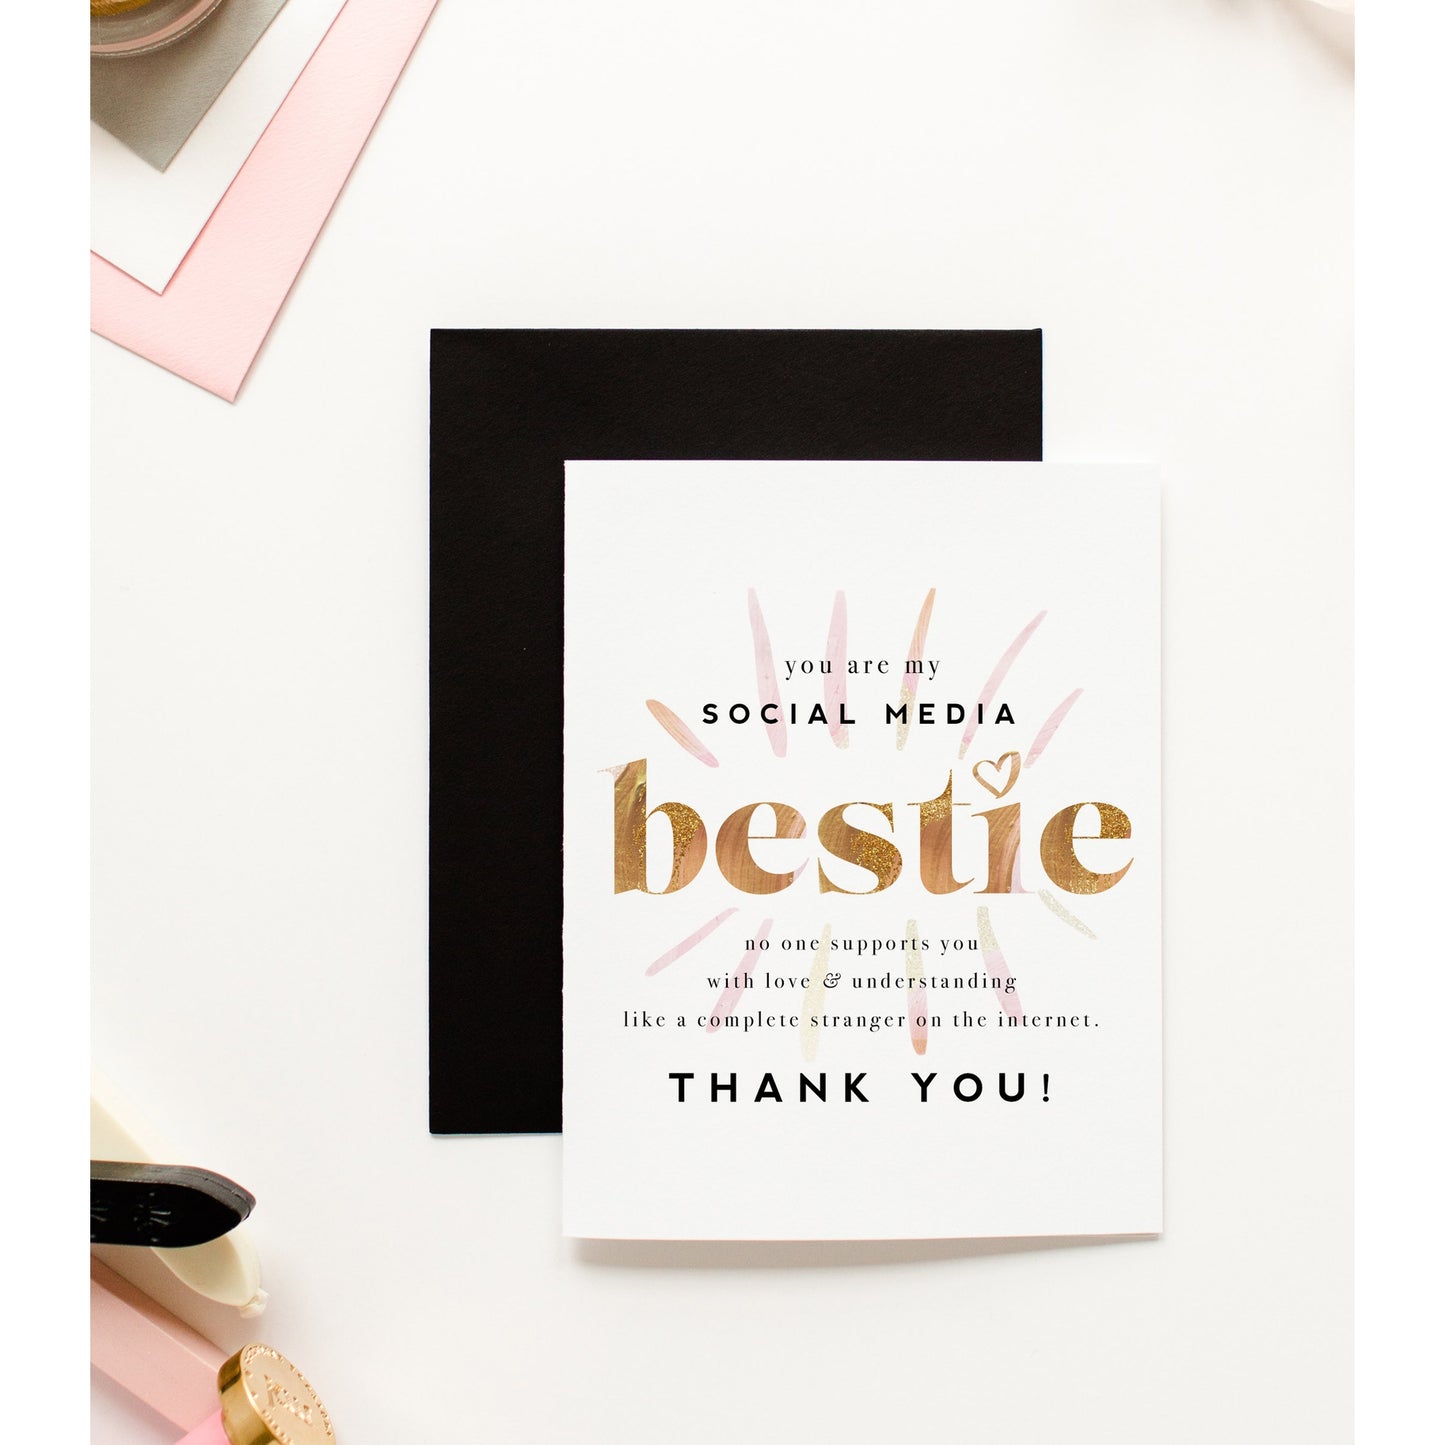 Social Media Bestie - Funny Small Business Card - Support